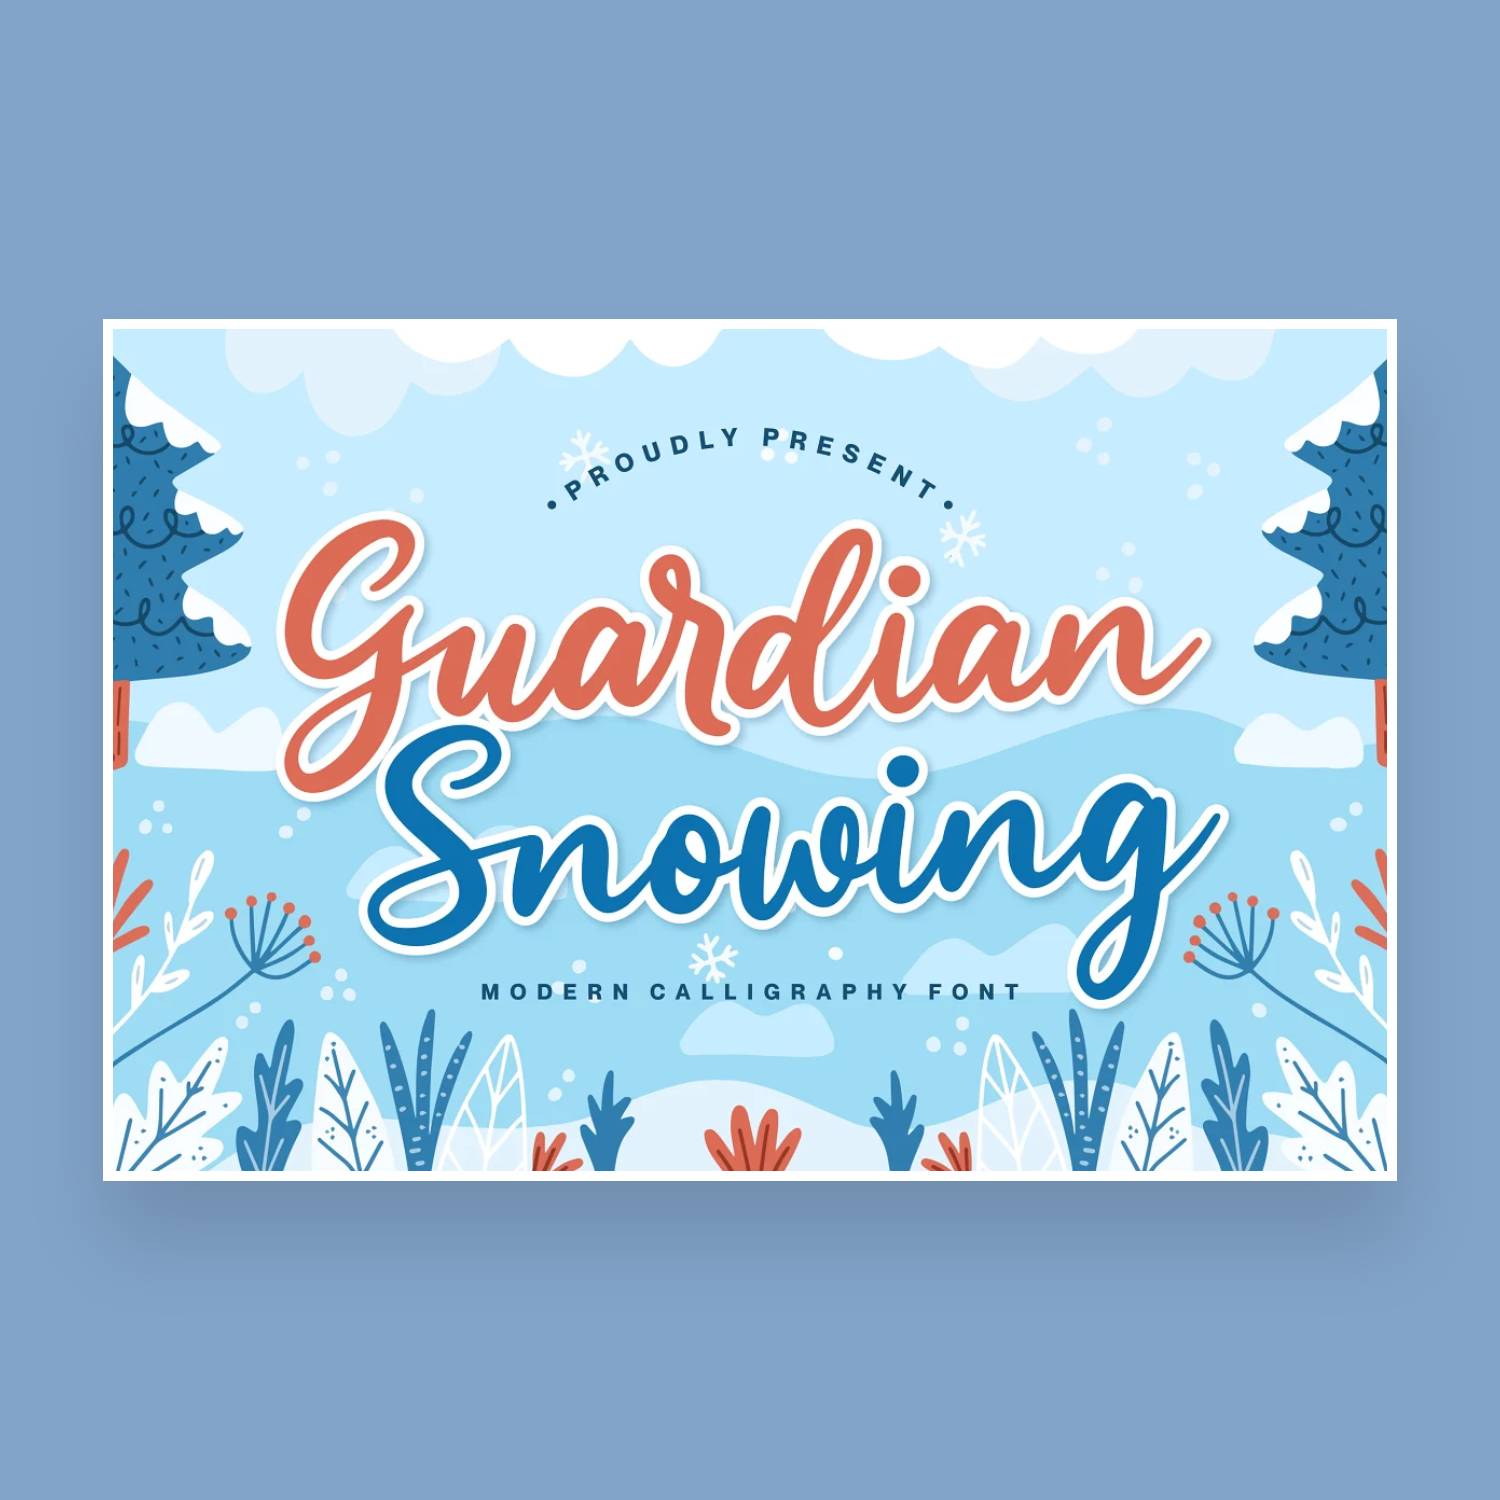 Guardian Snowing Font main cover.